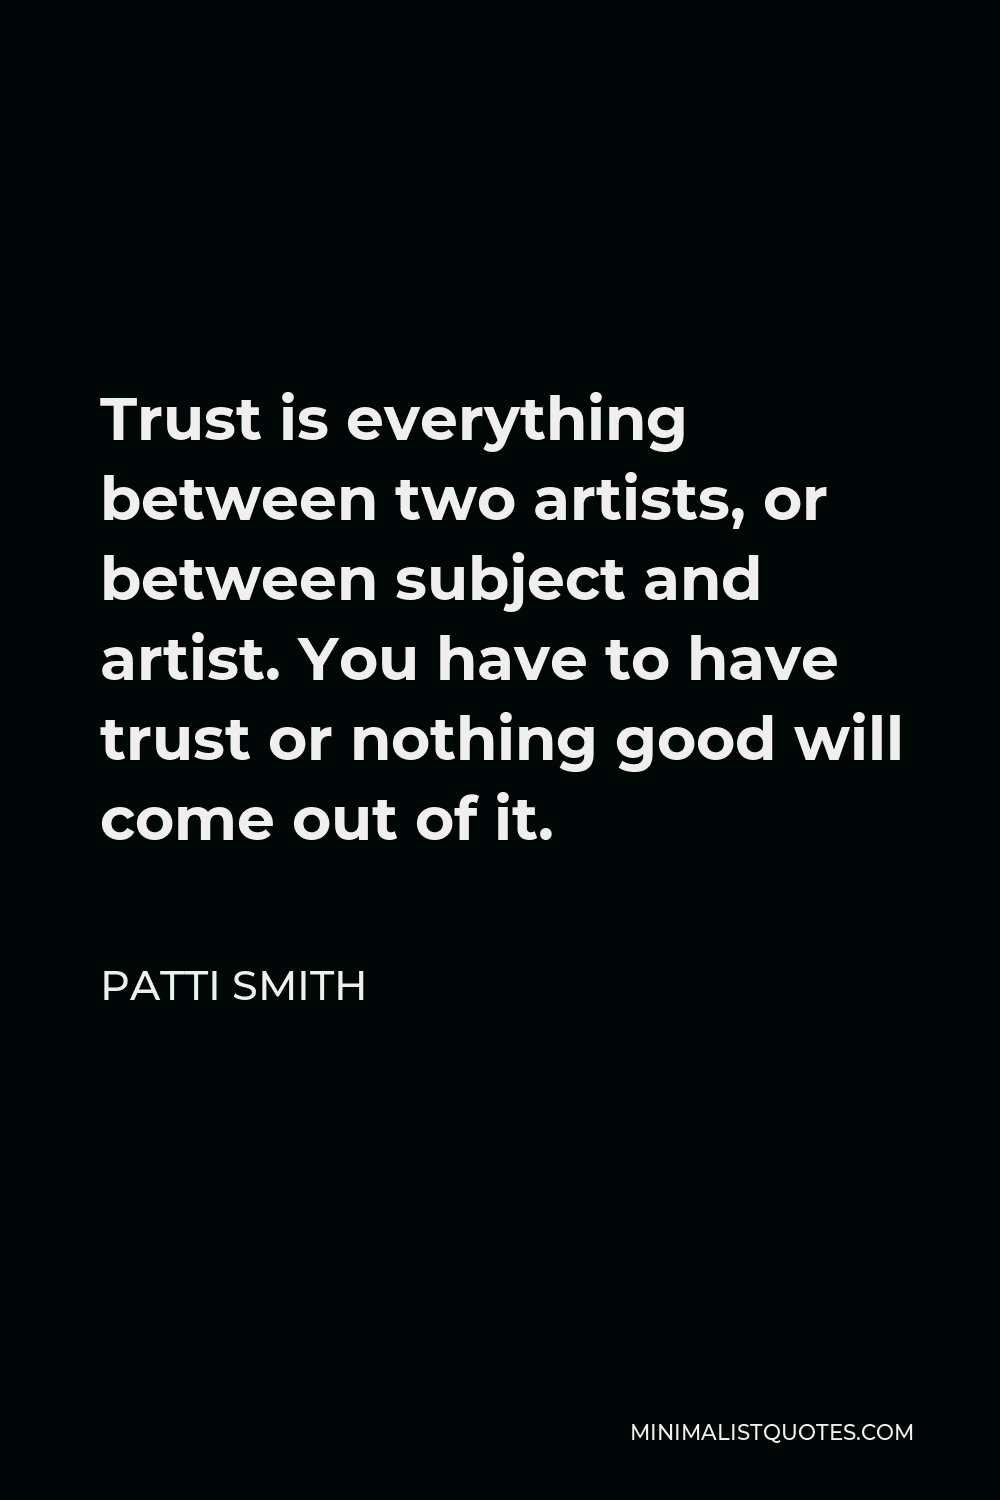 Patti Smith Quote - Trust is everything between two artists, or between subject and artist. You have to have trust or nothing good will come out of it.